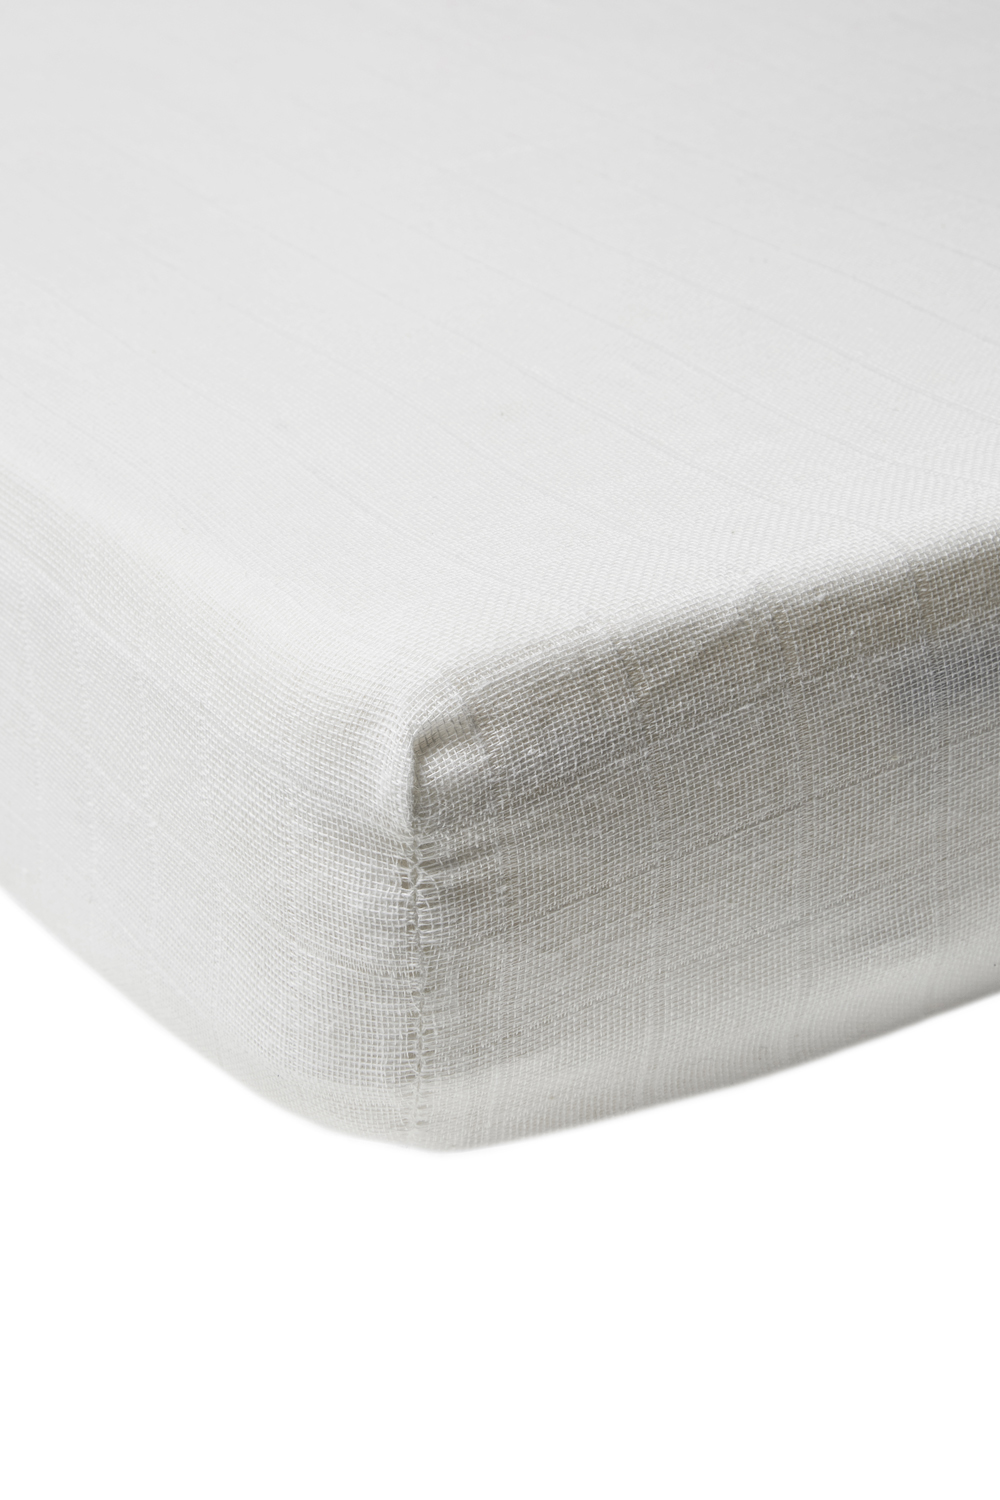 Fitted sheet cot bed muslin Uni - white - 60x120cm